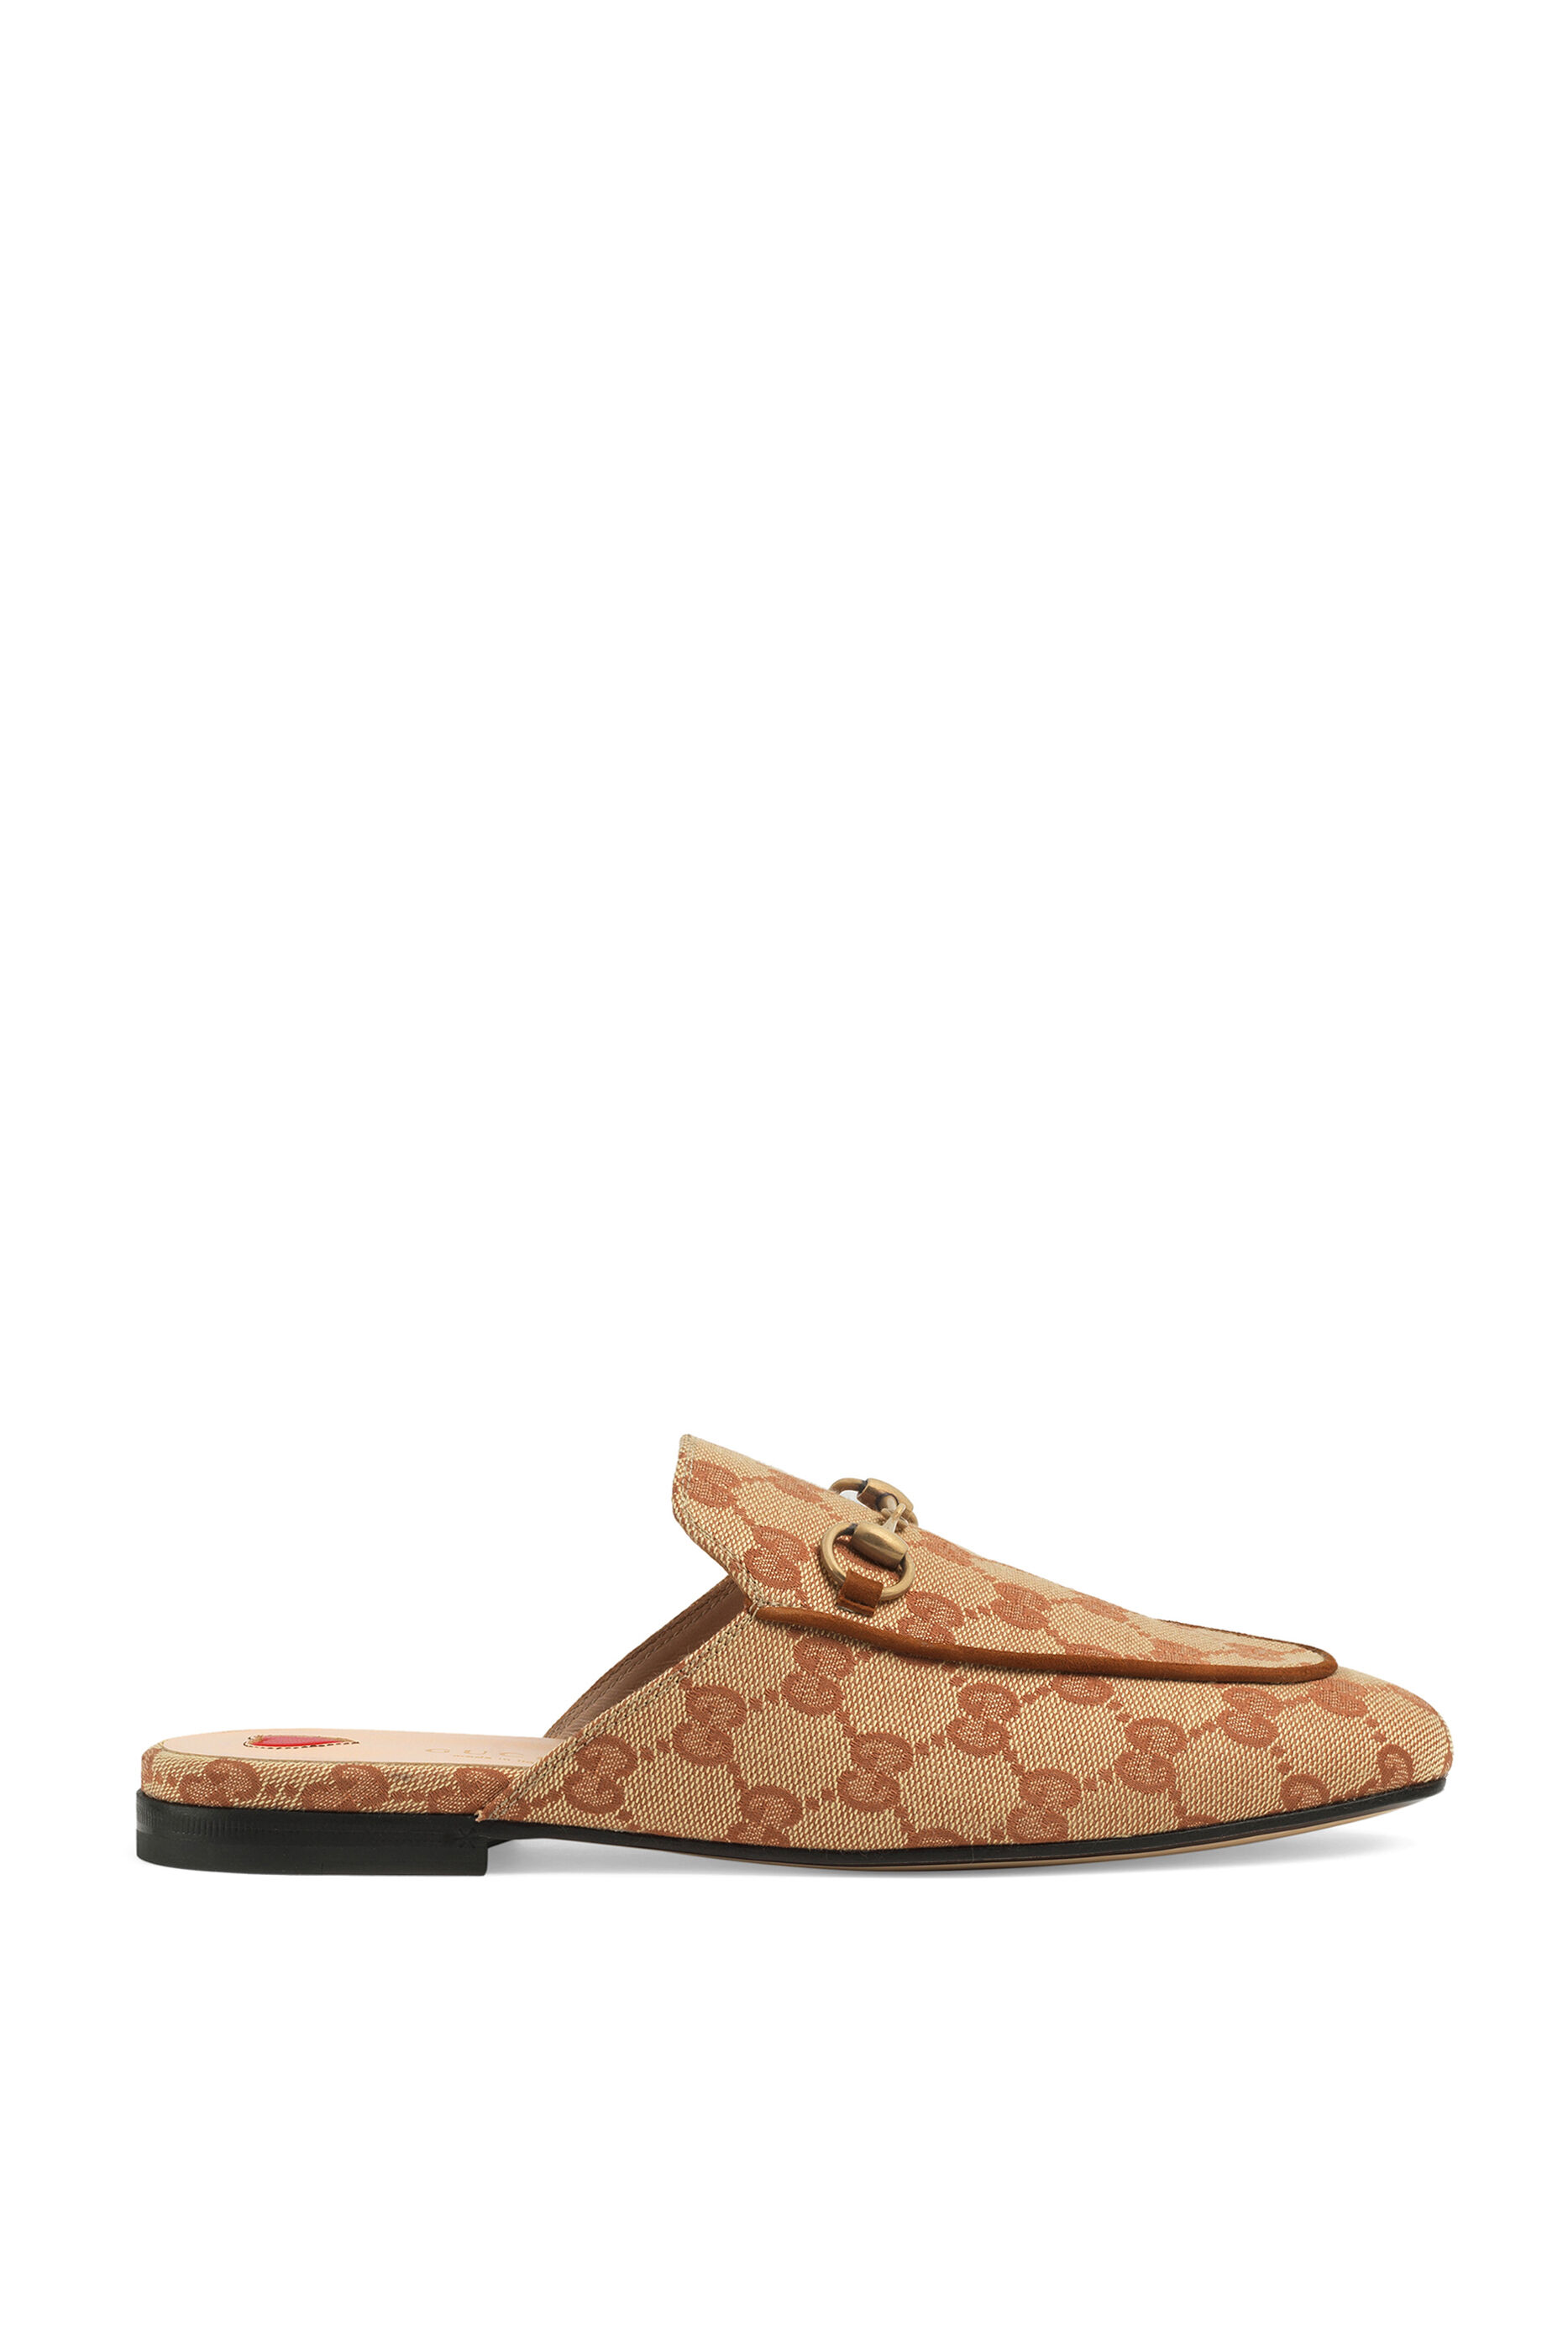 Buy Gucci Princetown GG Canvas Slippers 